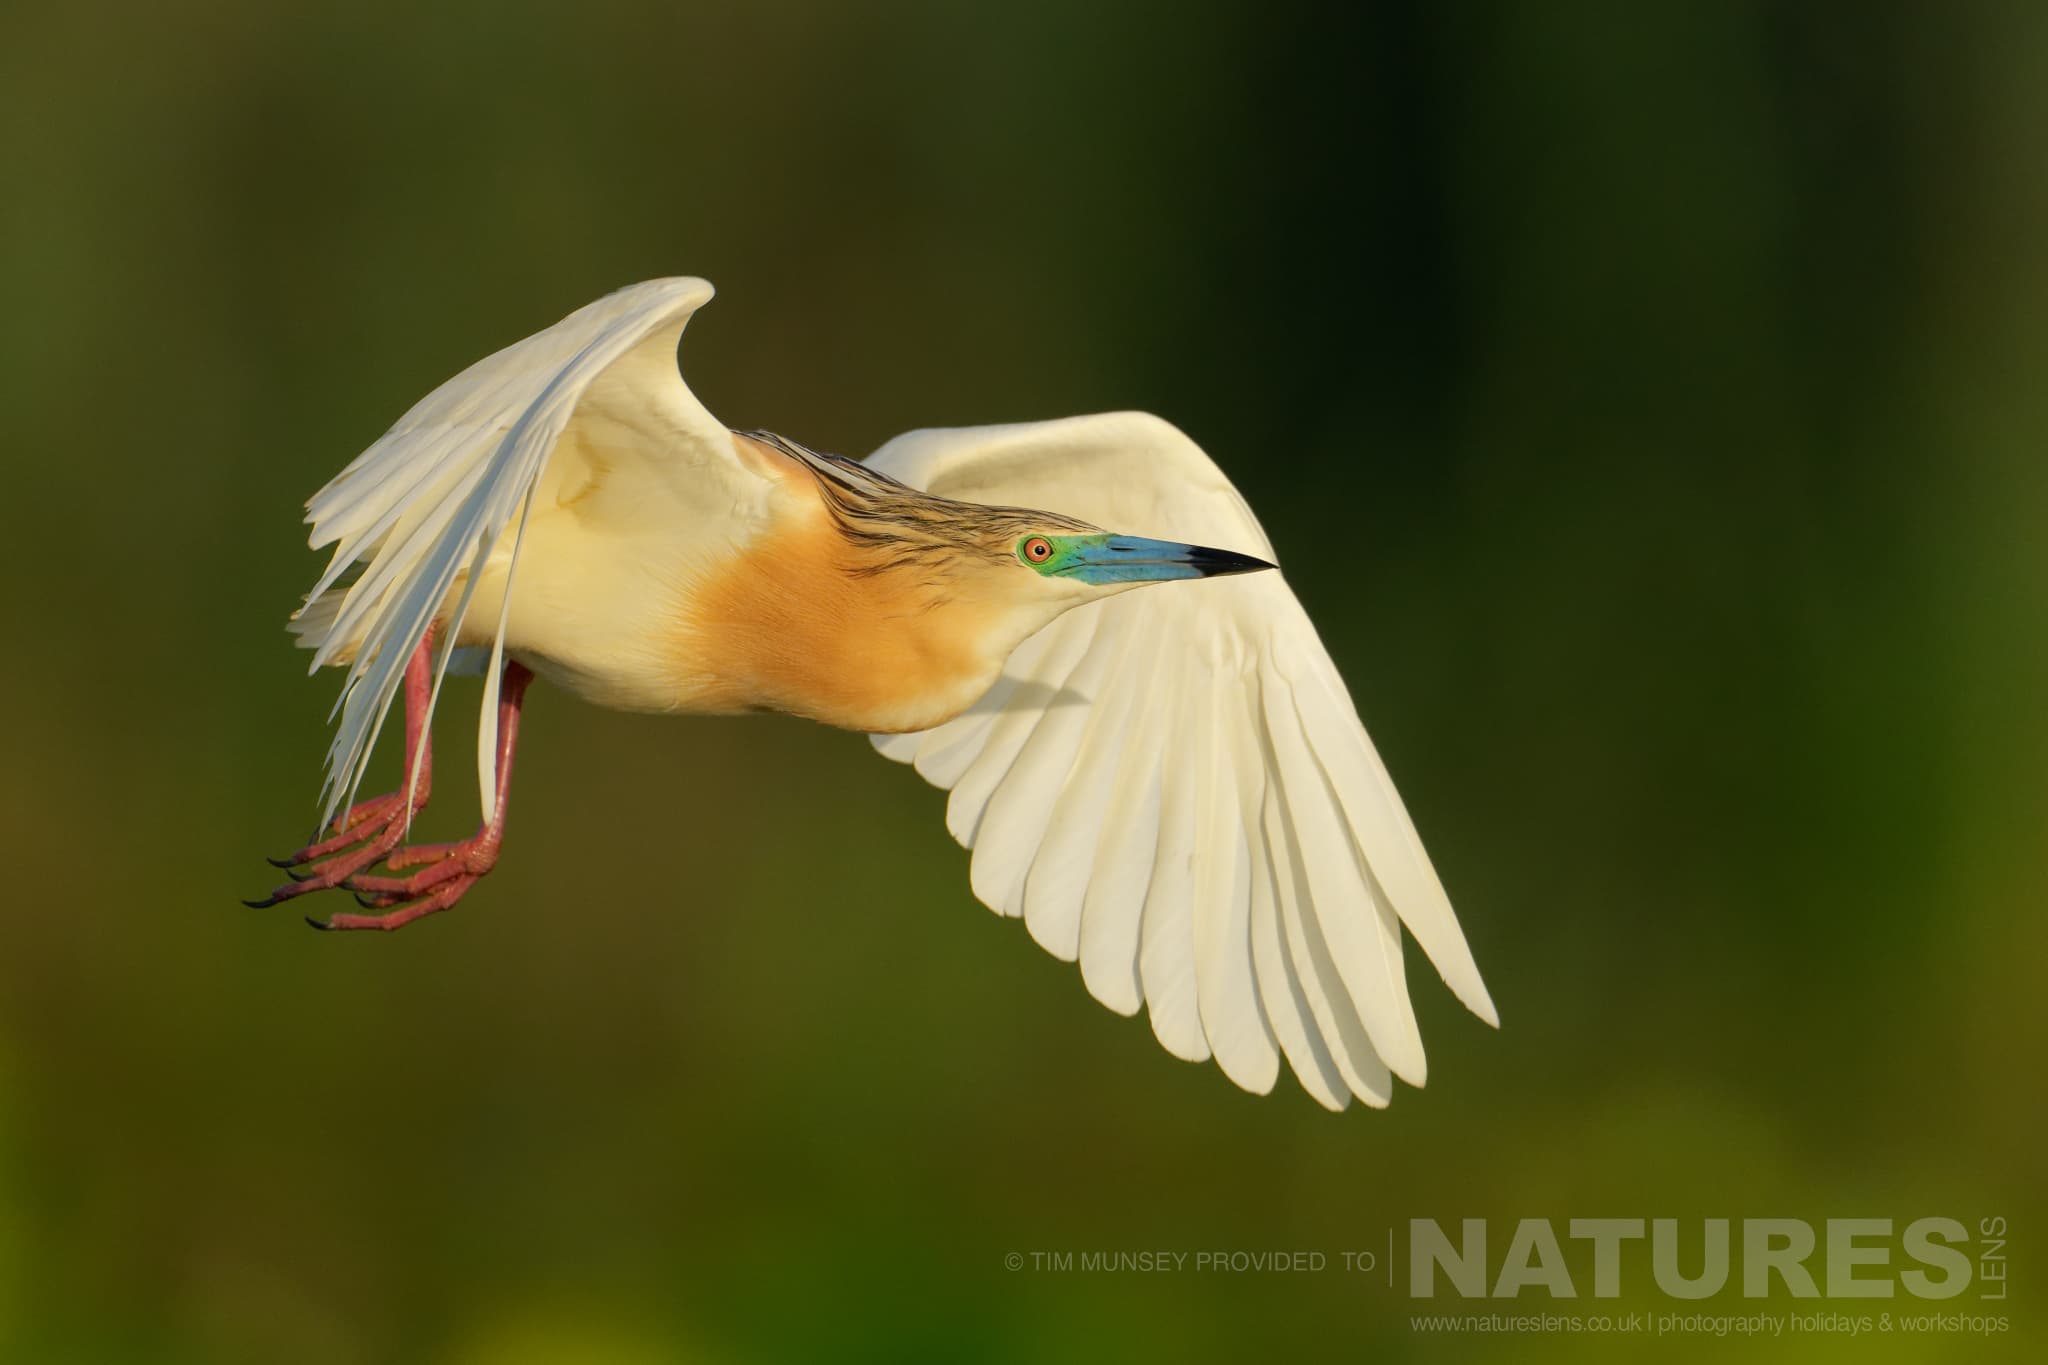 A Squacco Heron In Flight One Of The Species That Features On The Natureslens Birds Of The Danube Delta Photography Holiday